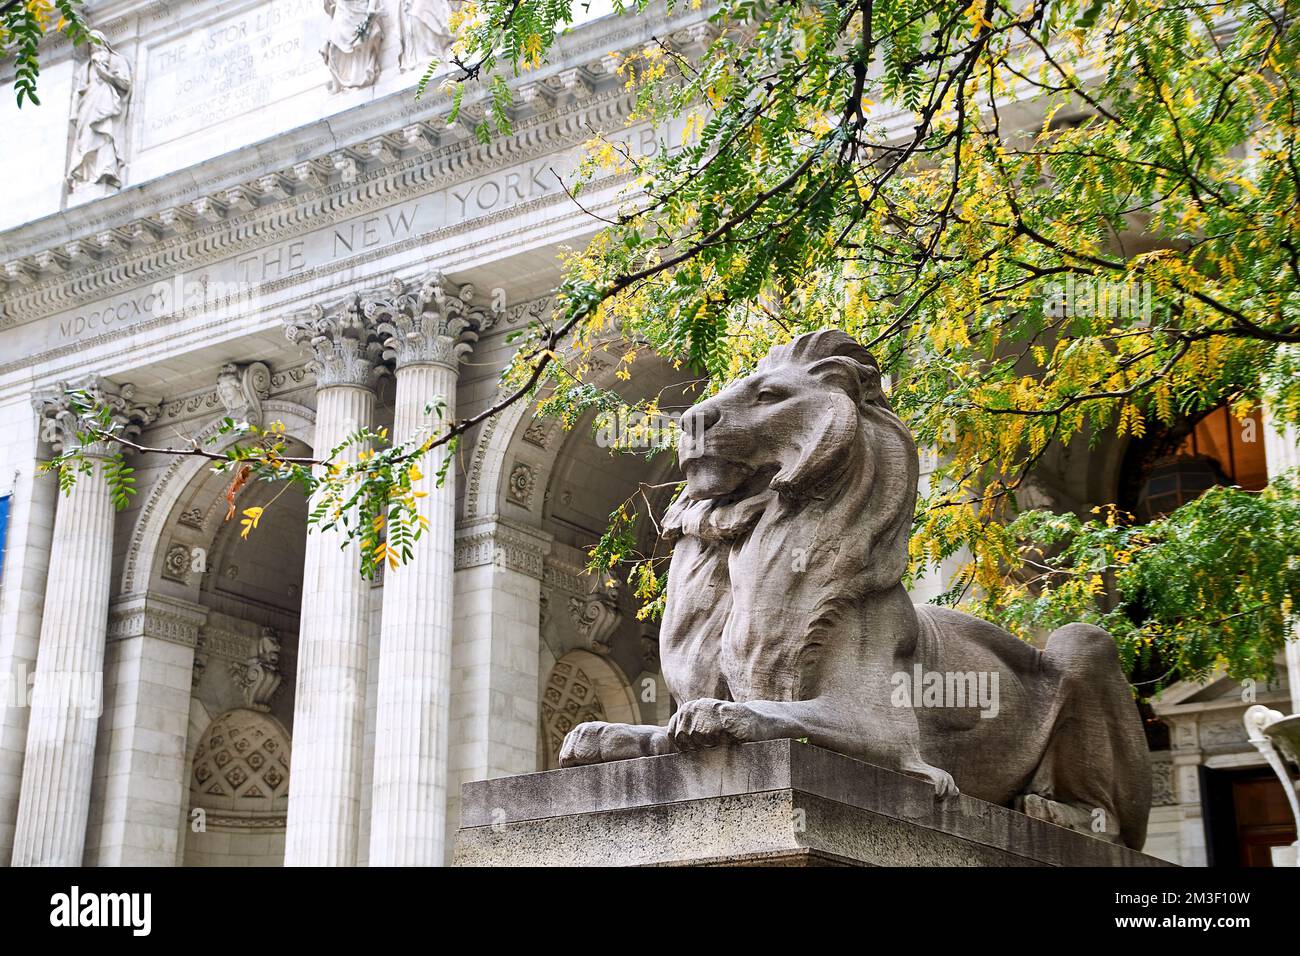 Lion sculpture at the steps of New York Public Library in autumn Stock Photo